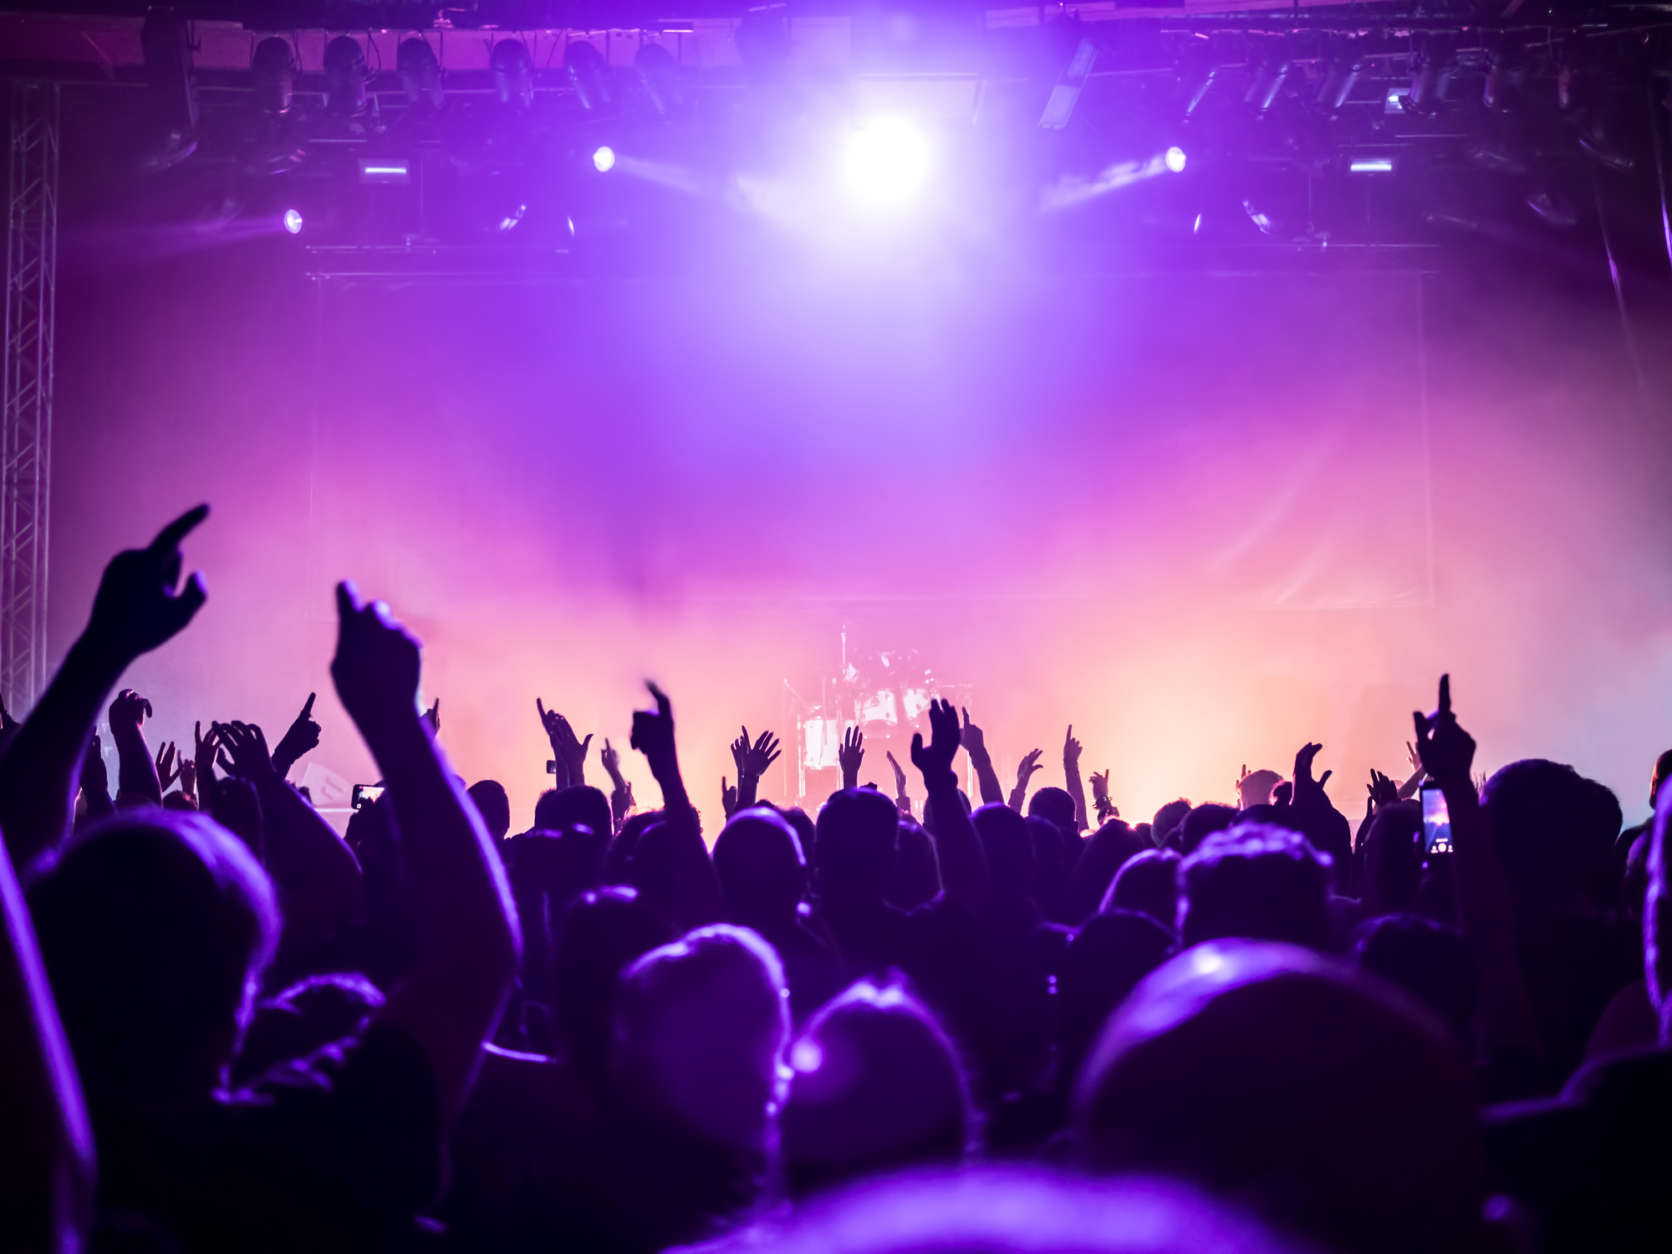 Summer concert season is just around the corner, and Live Nation is turning up the heat by offering fans concert tickets for around $20 starting 8 a.m. May 2. (Thinkstock)